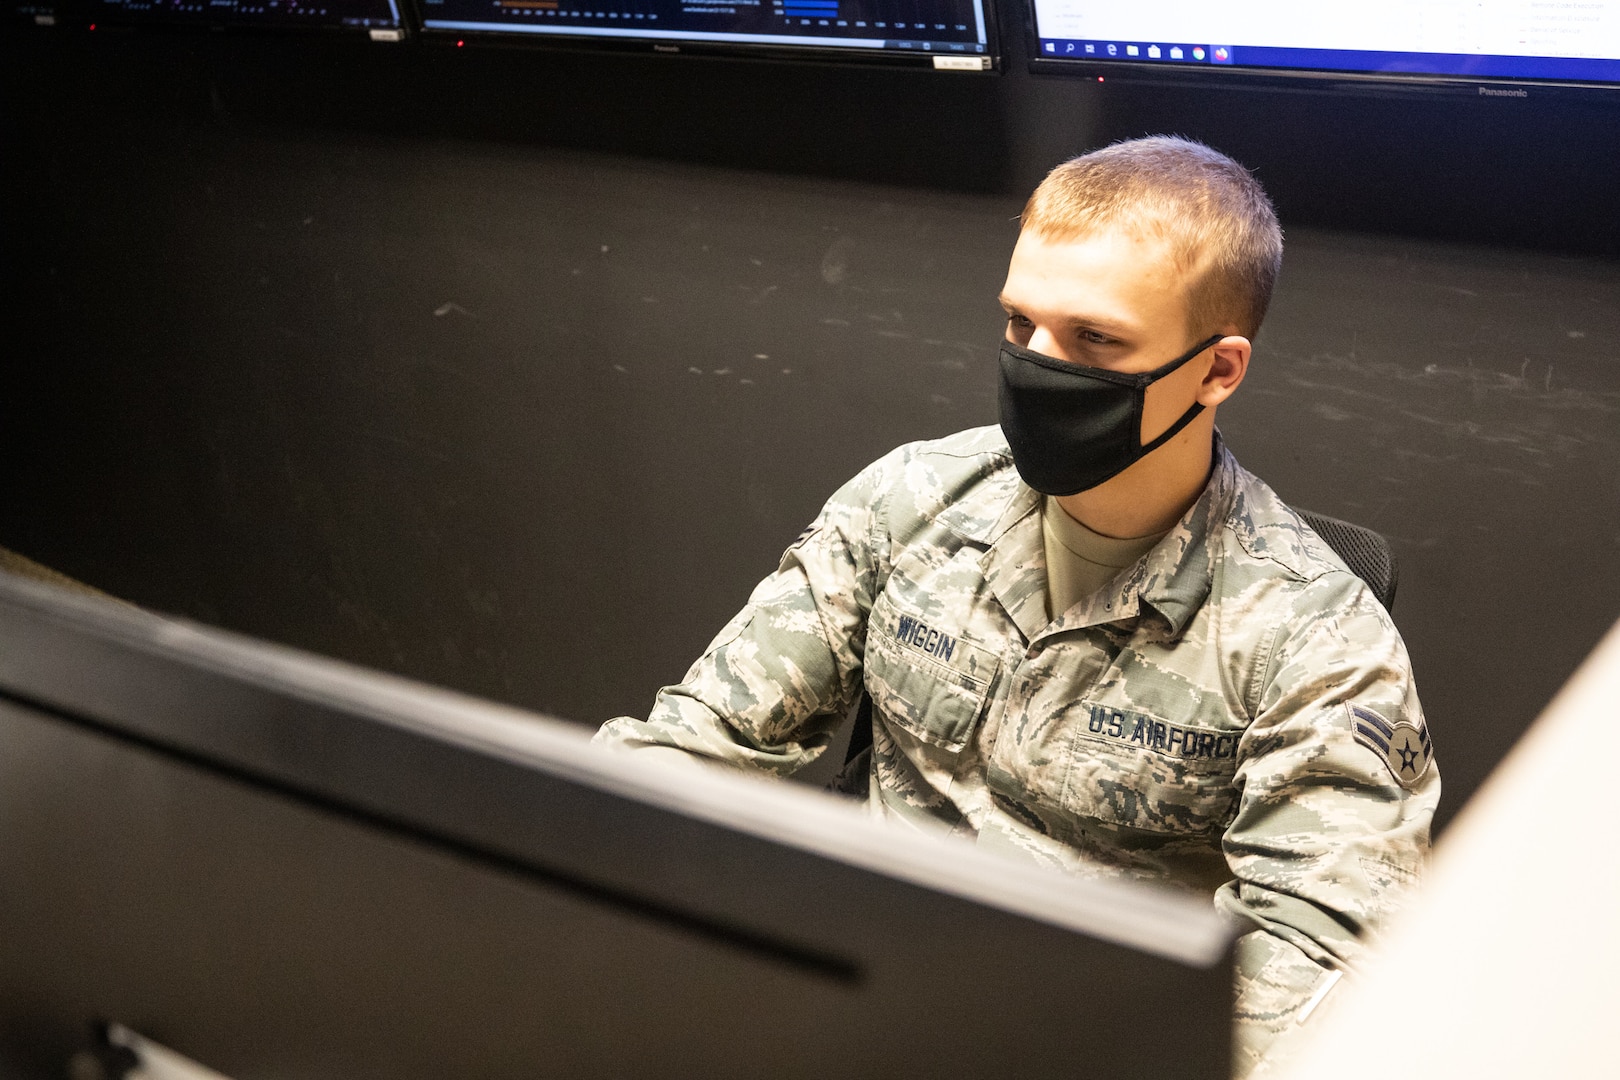 In support of COVID-19 relief operations for the state’s department of information technology, Airman 1st Class Noah Wiggin, an IT specialist with 157th Air Refueling Wing Communication Flight, configures dashboards in Concord on May 26, 2020.